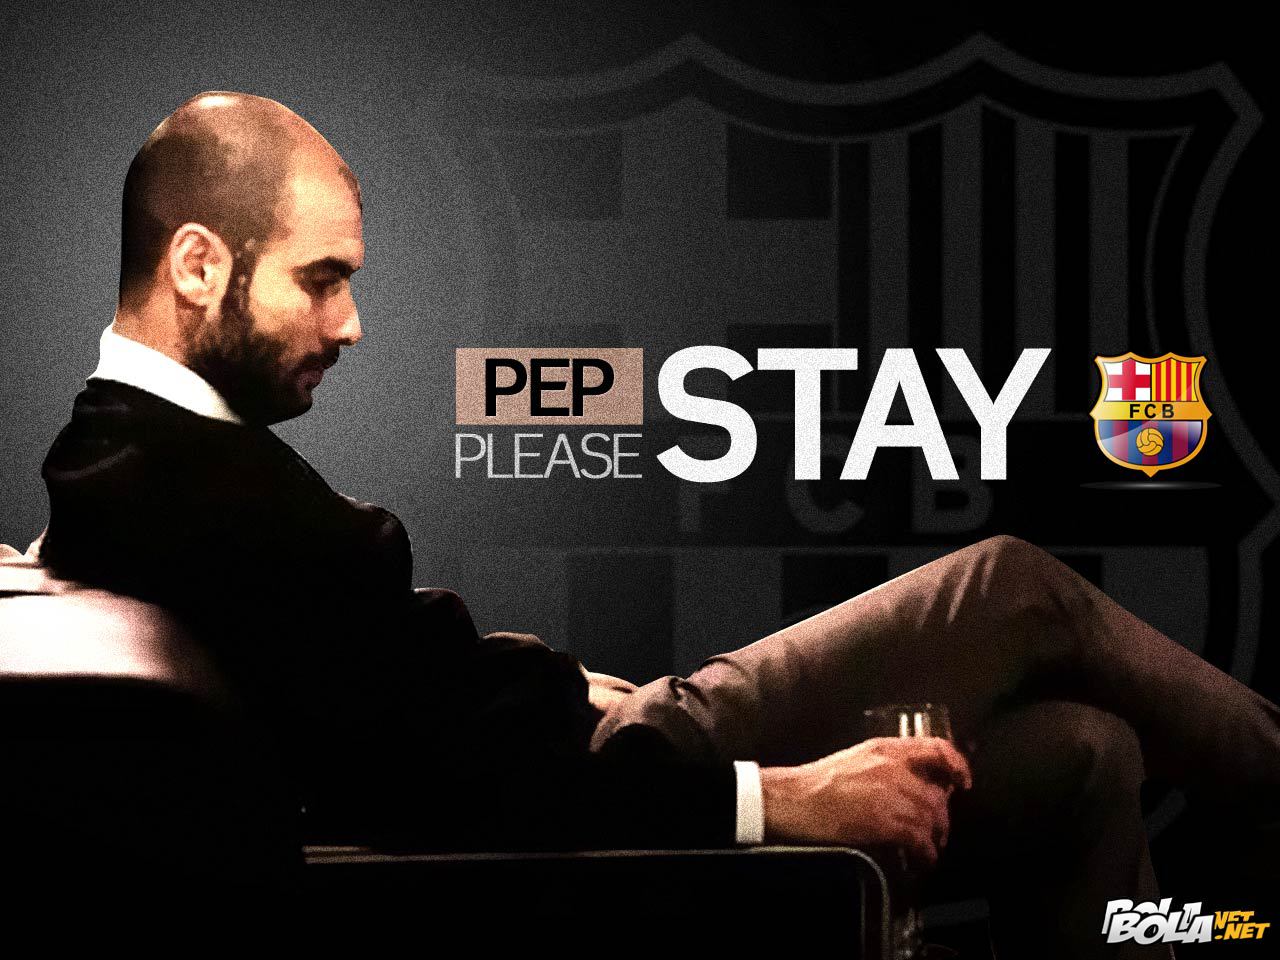 Deskripsi : Wallpaper Pep Please Stay At Barca, size: 1280x960